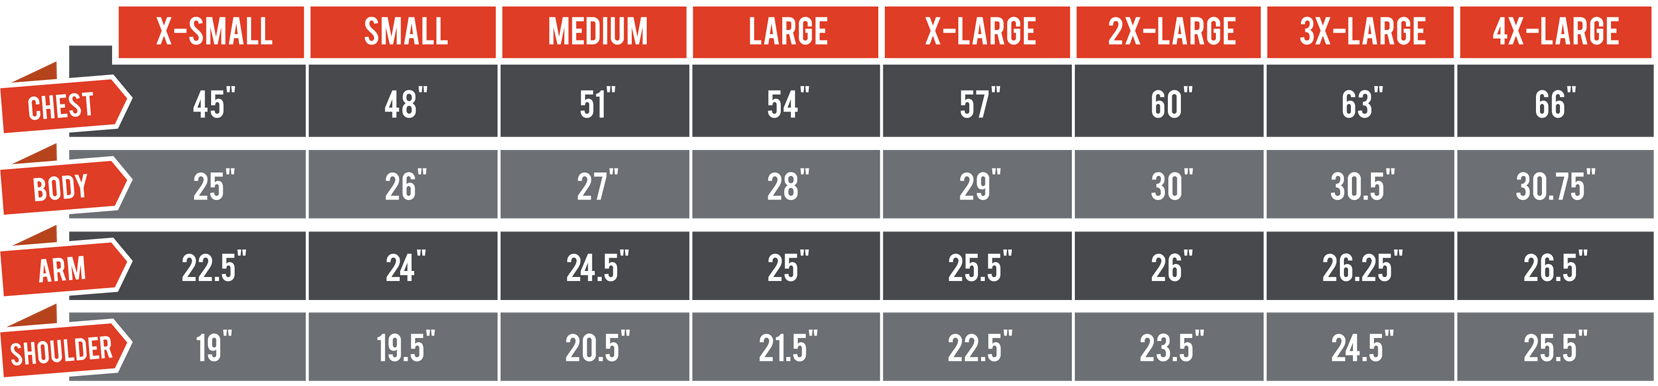 Jacket Size Guide